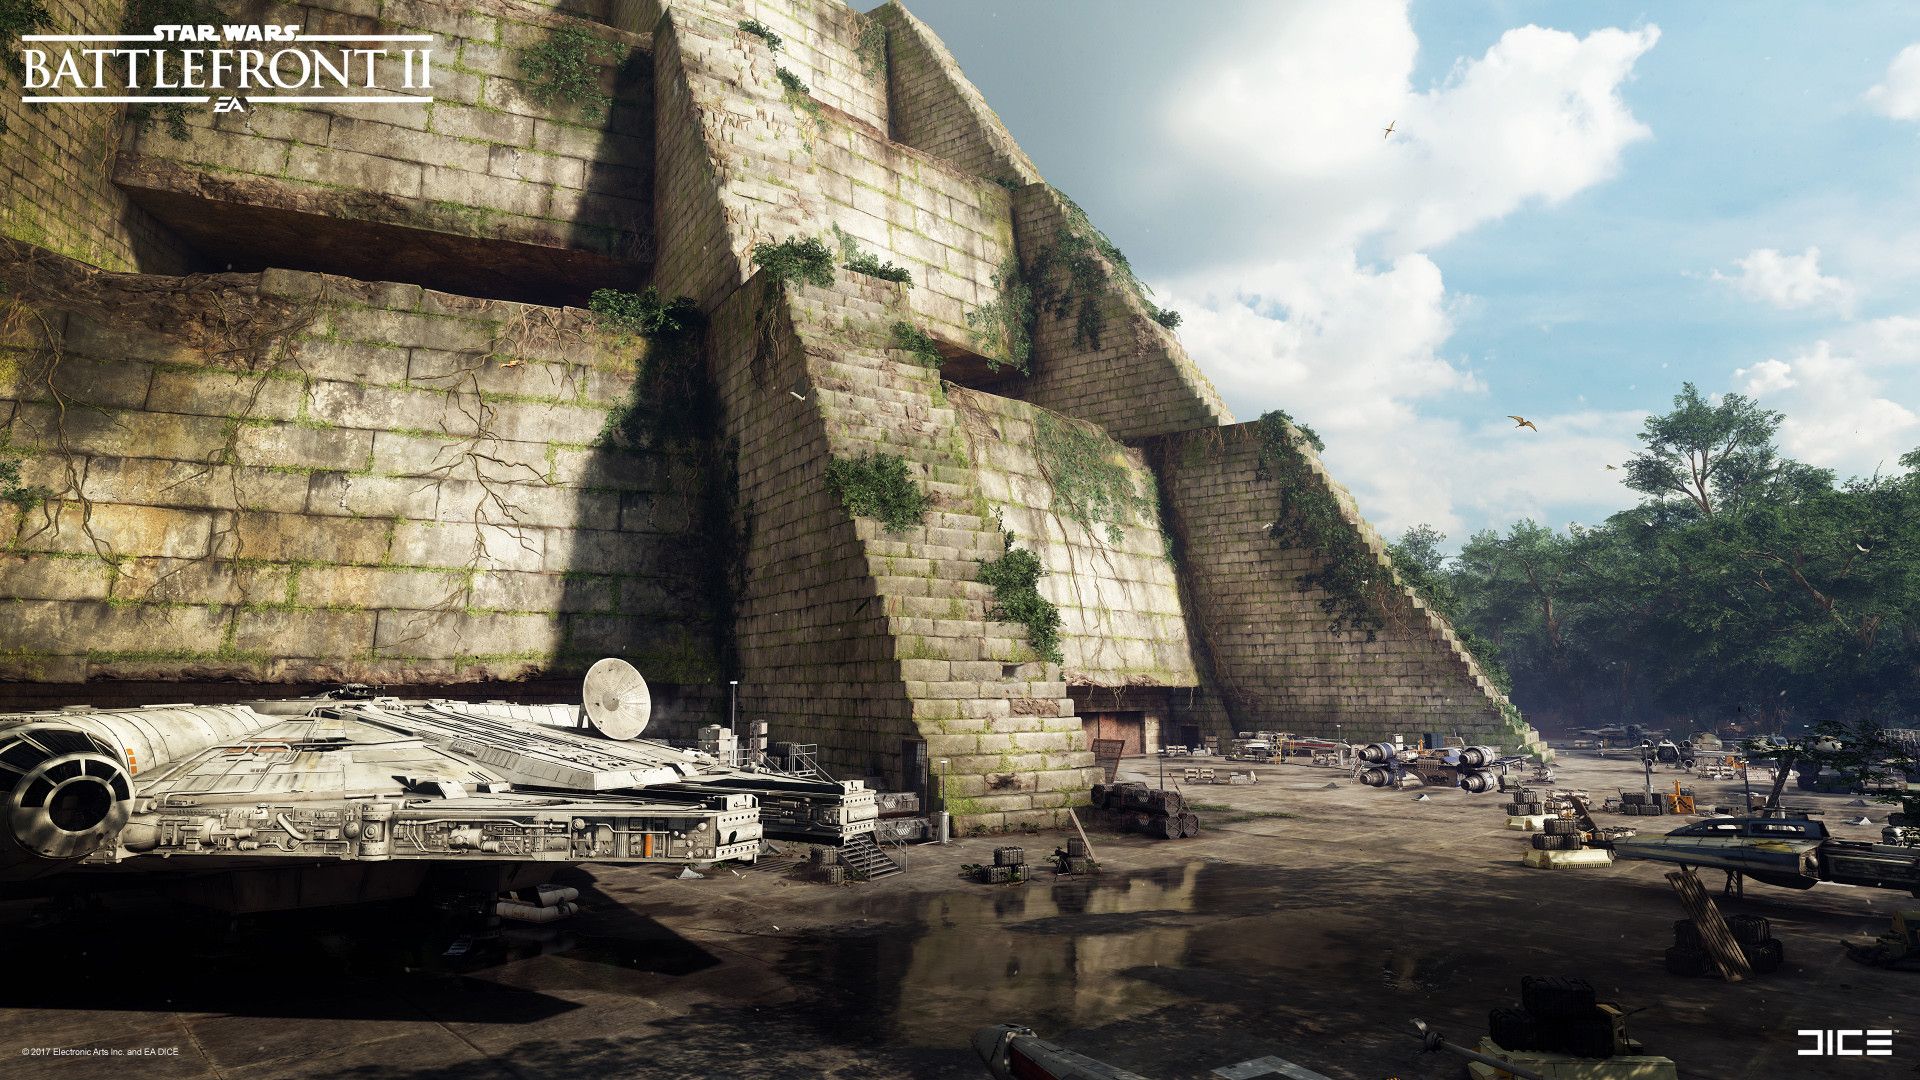 Yavin 4: The Great Temple. Star Wars Battlefront